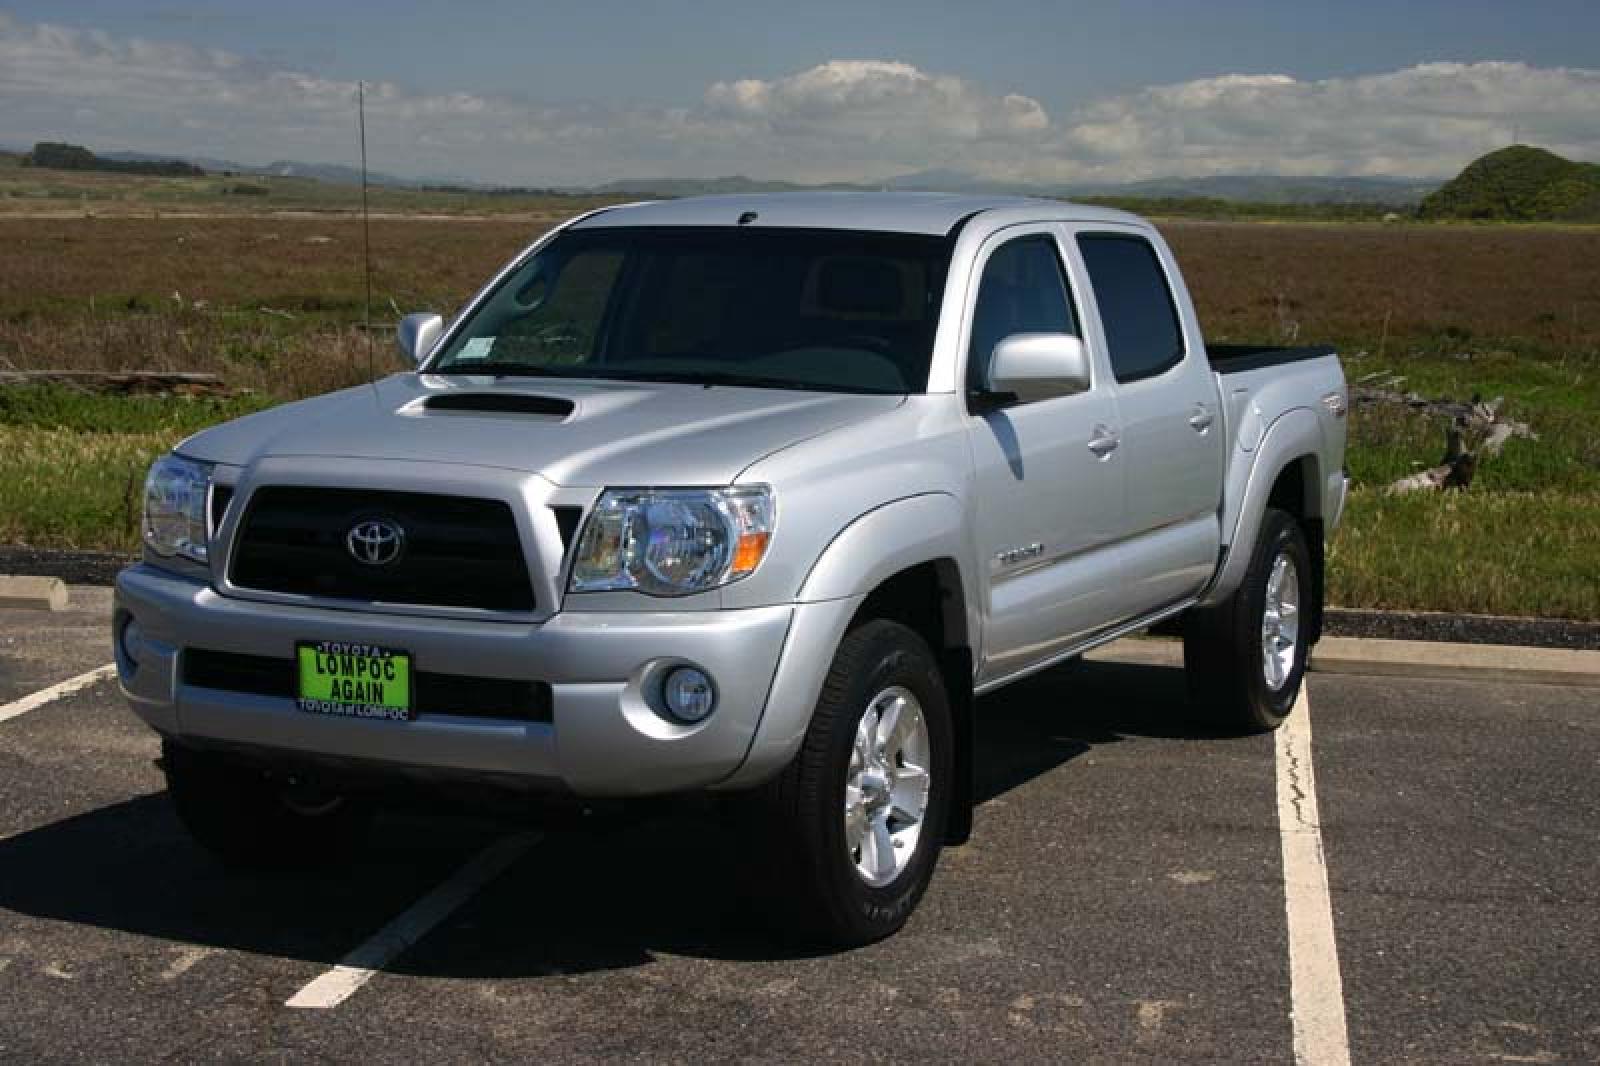 2006 toyota tacoma fan only works on high